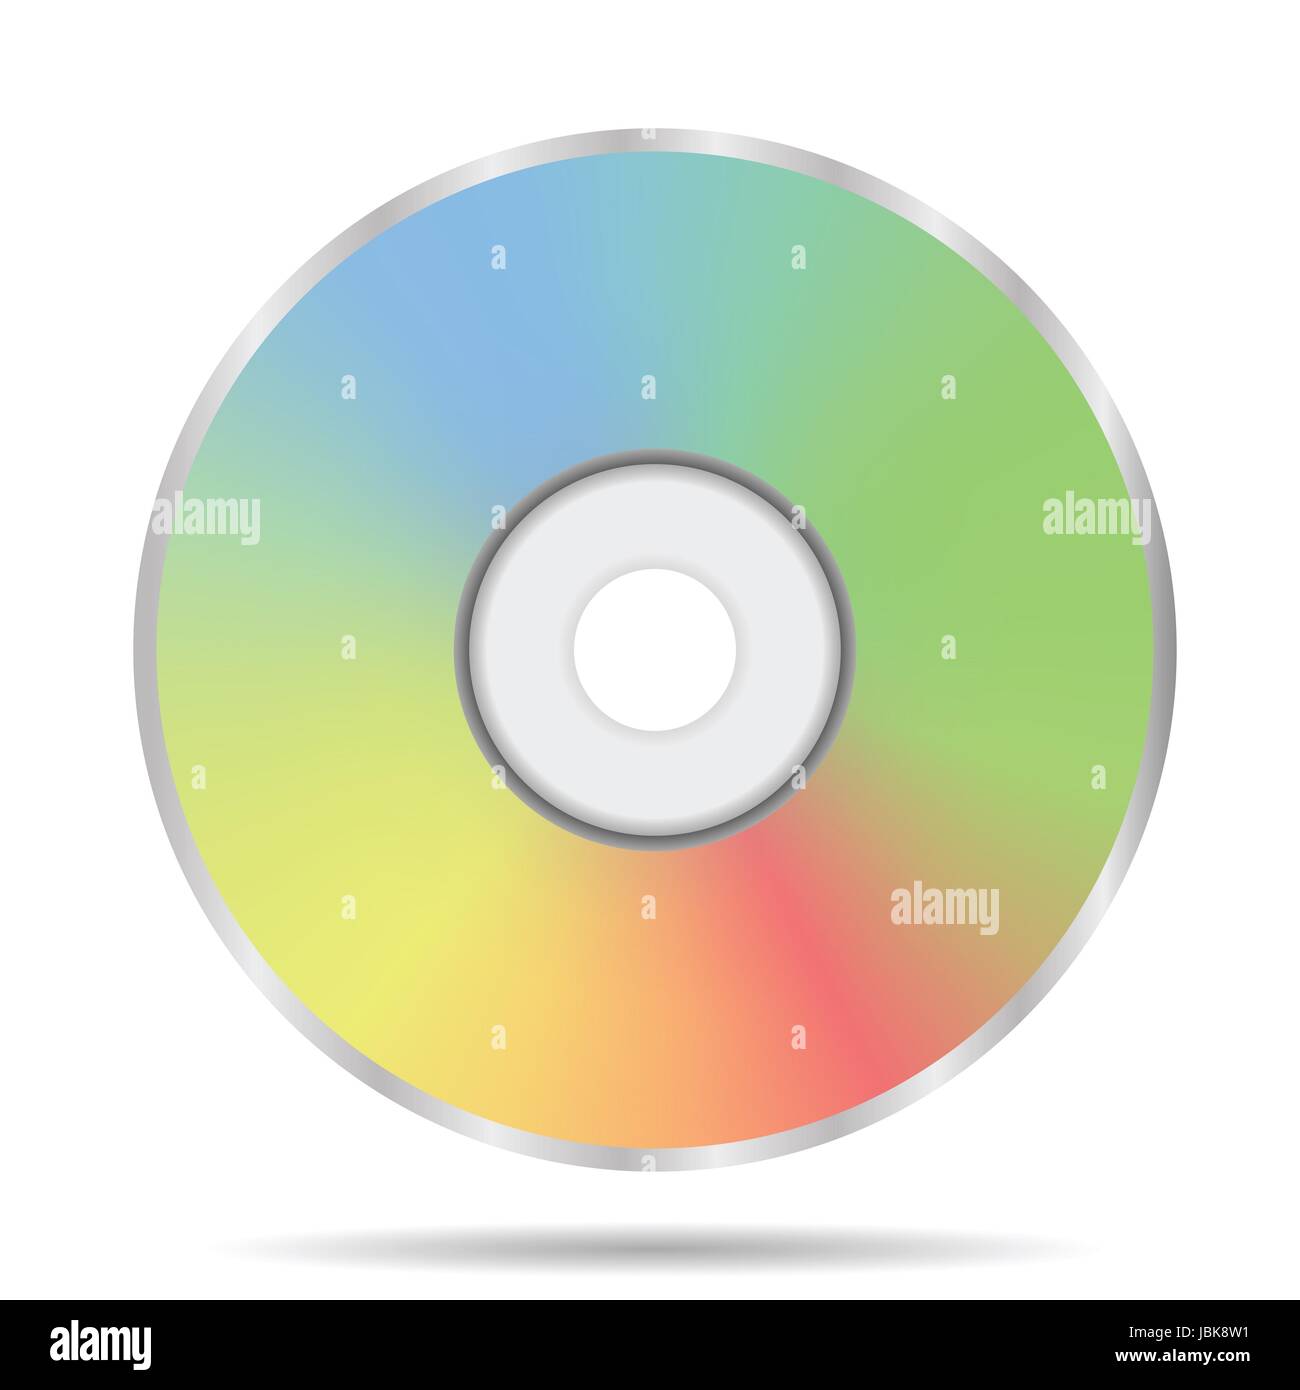 colorful illustration with compact disc on a white background for your design Stock Photo